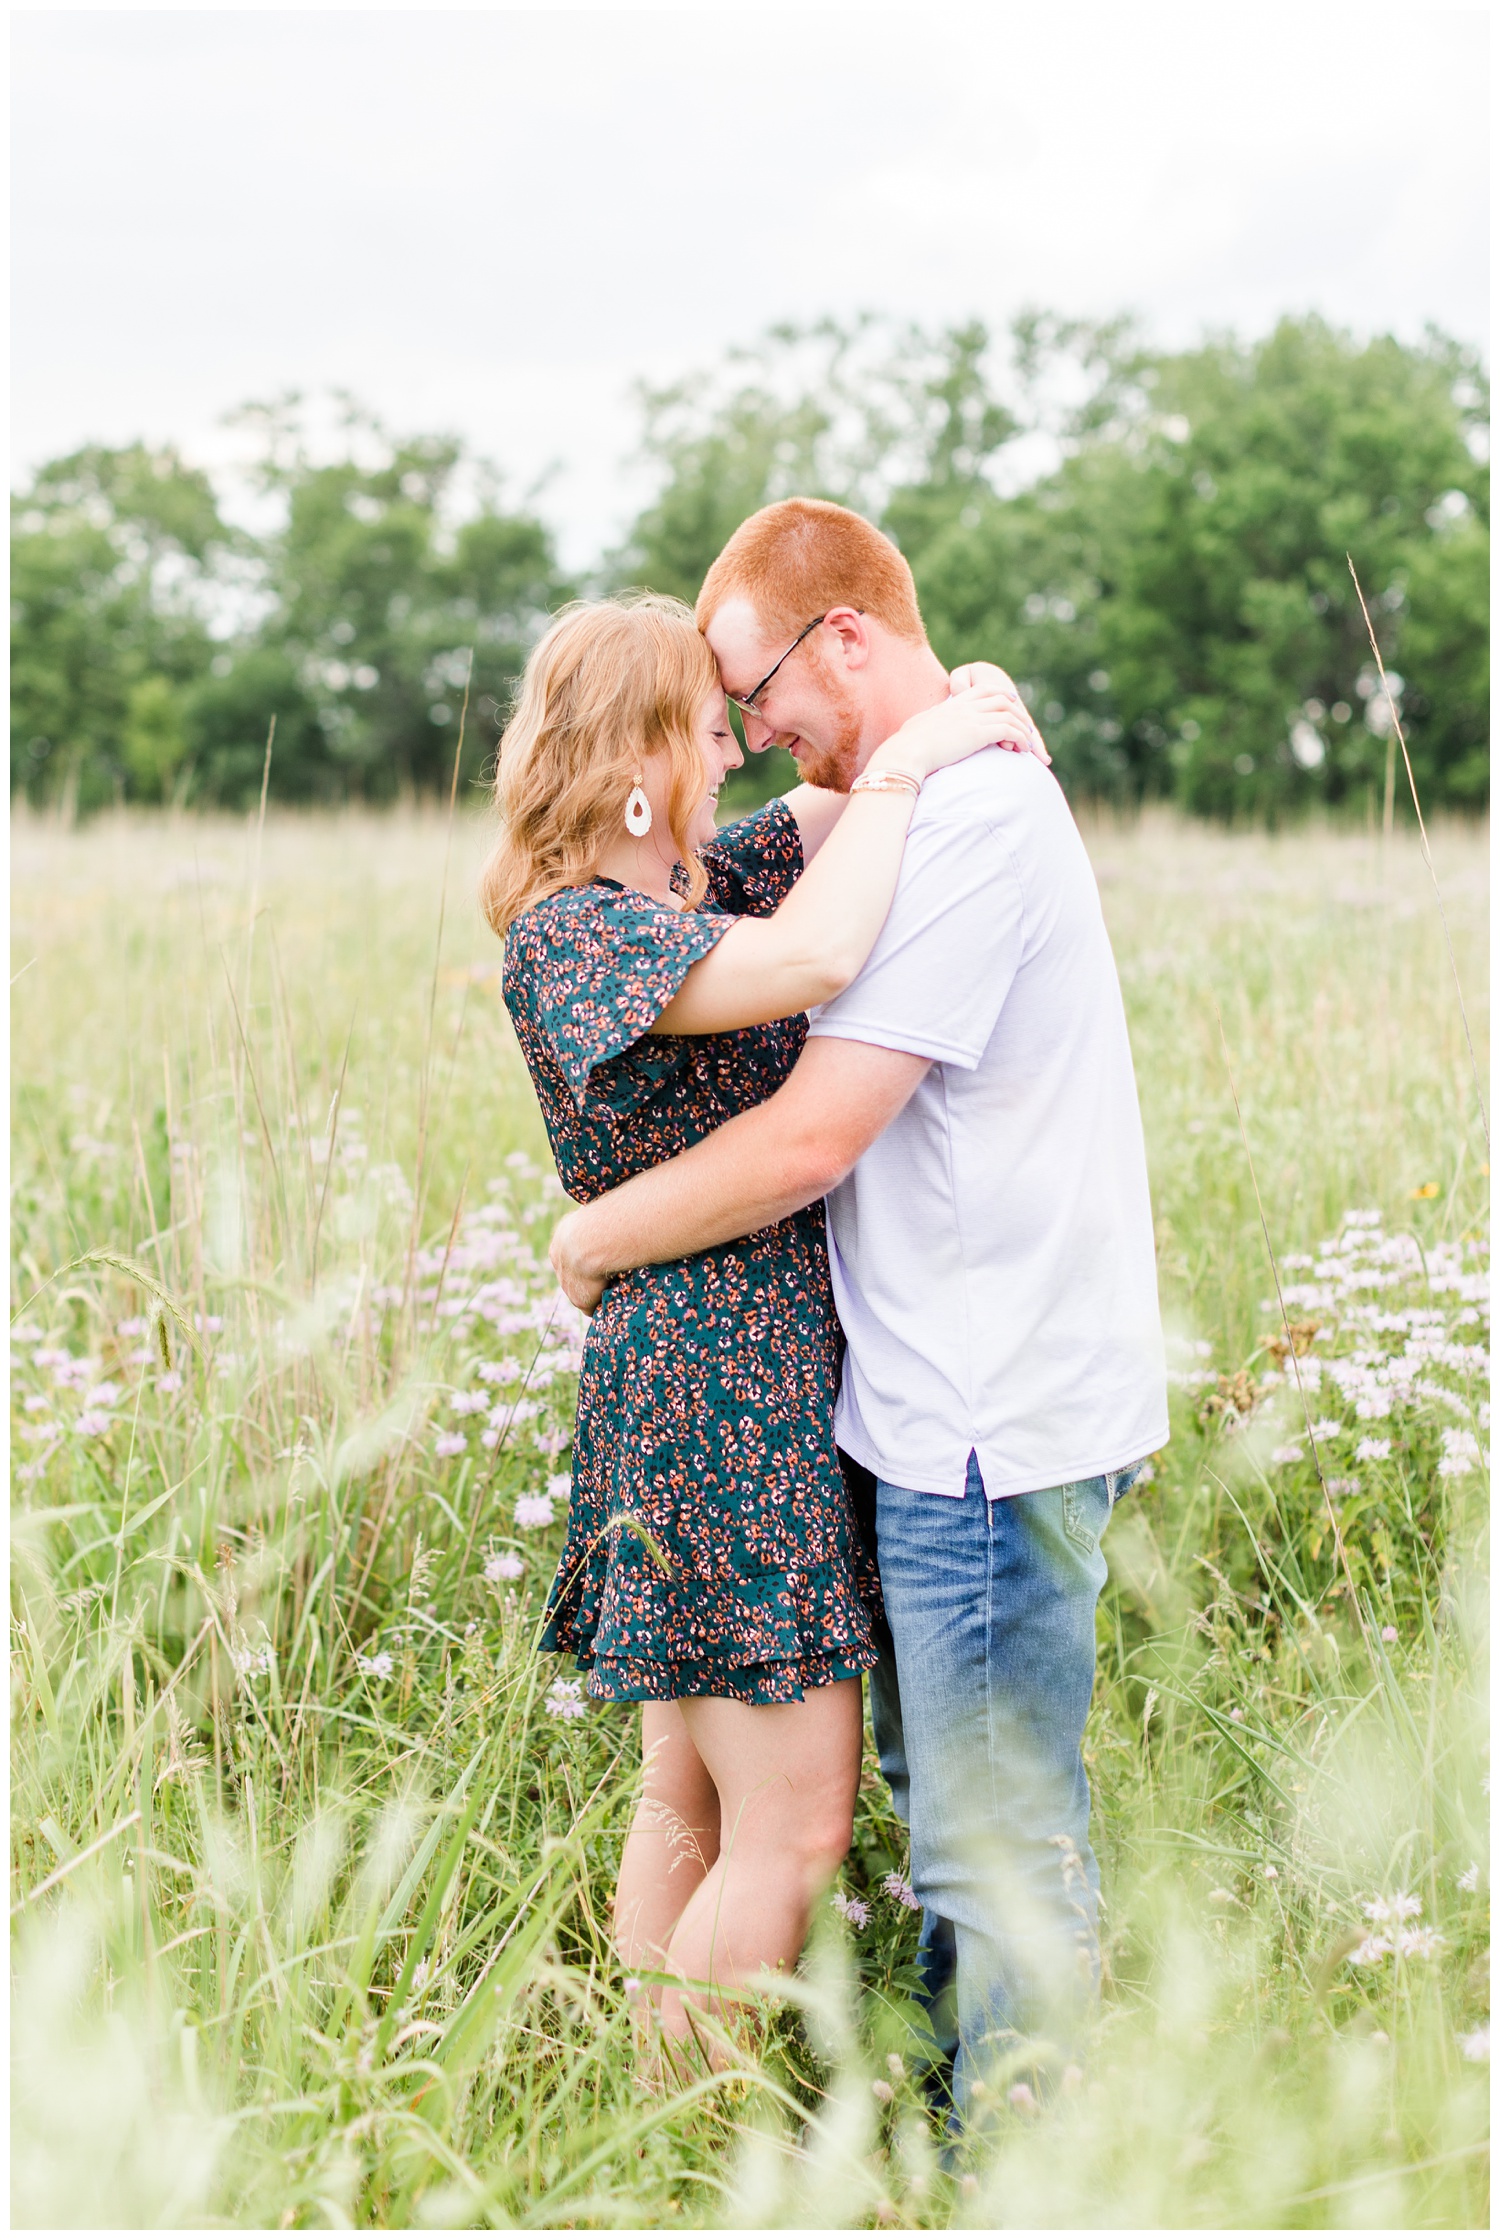 Leslie and Matt embrace each other in the middle of a wildflower field | CB Studio